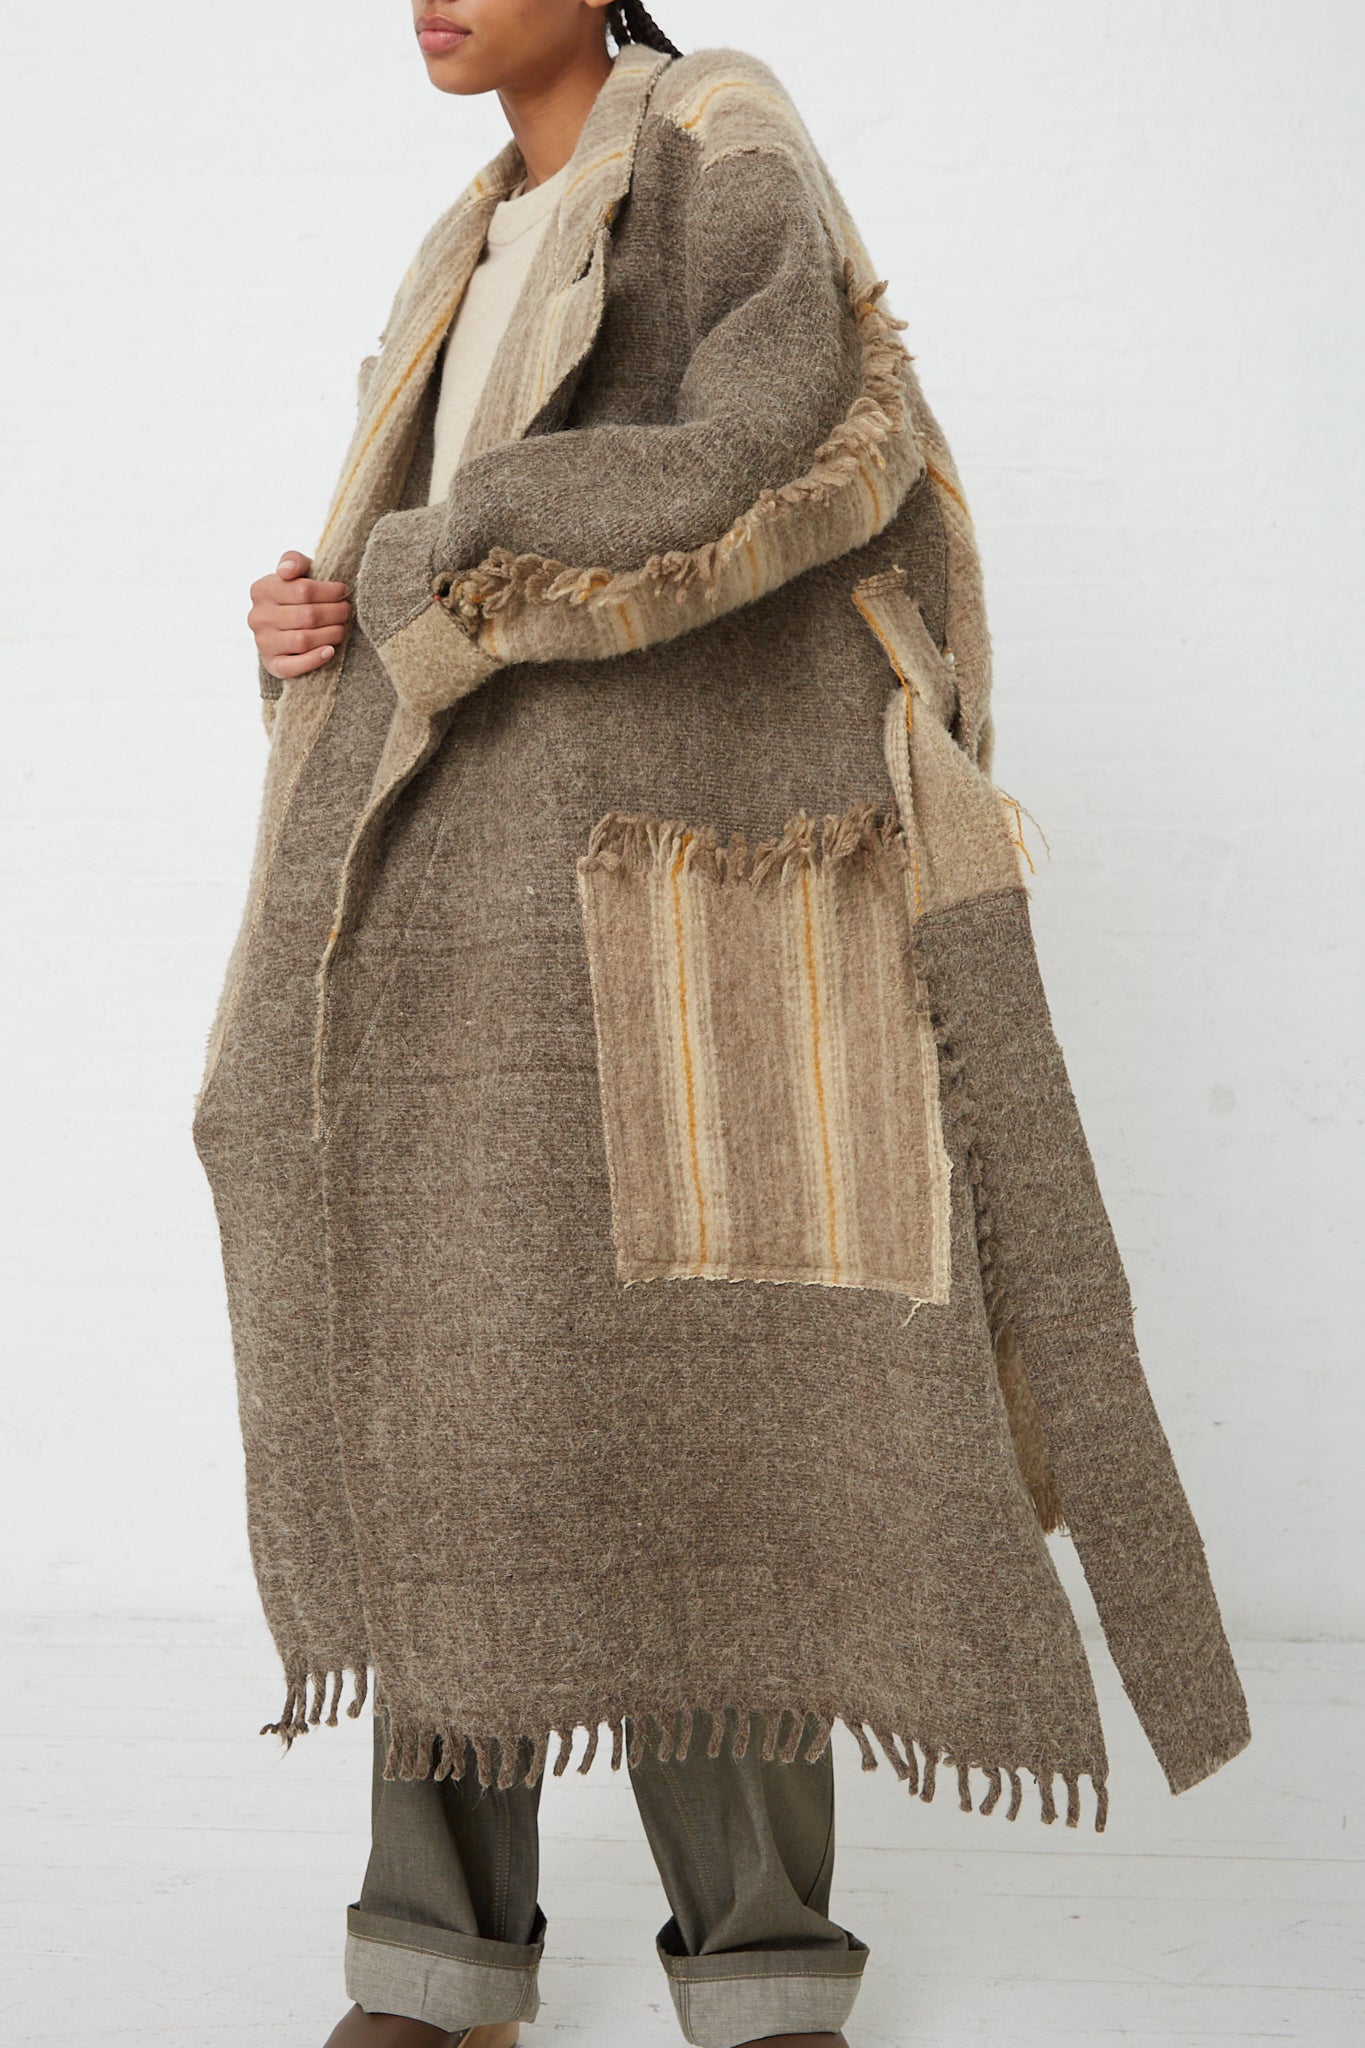 A woman wearing a Thank You Have A Good Day Wool Blanket Swing Trench.